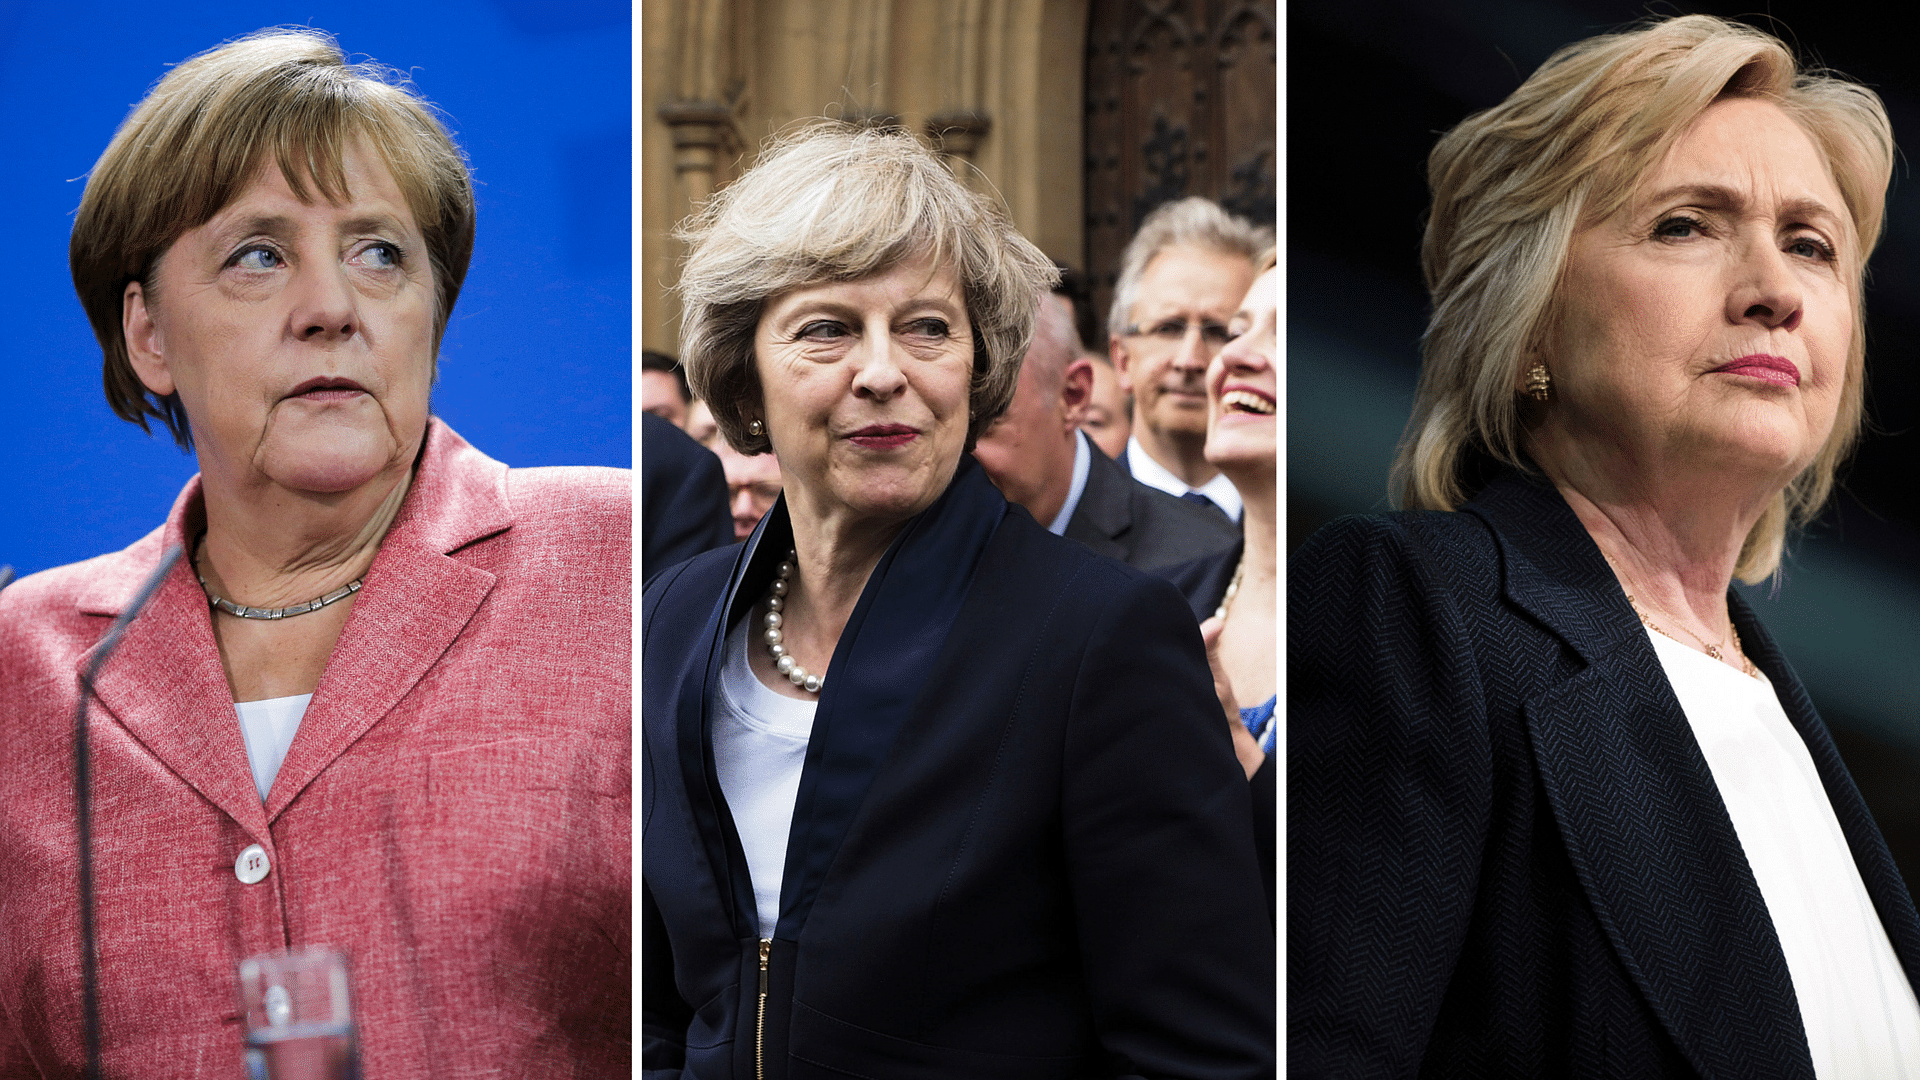 By early 2017, women may well be leading three of the six largest economic powers of the world. From left: Angela Merkel, Theresa May and Hillary Clinton. (Photos: AP)